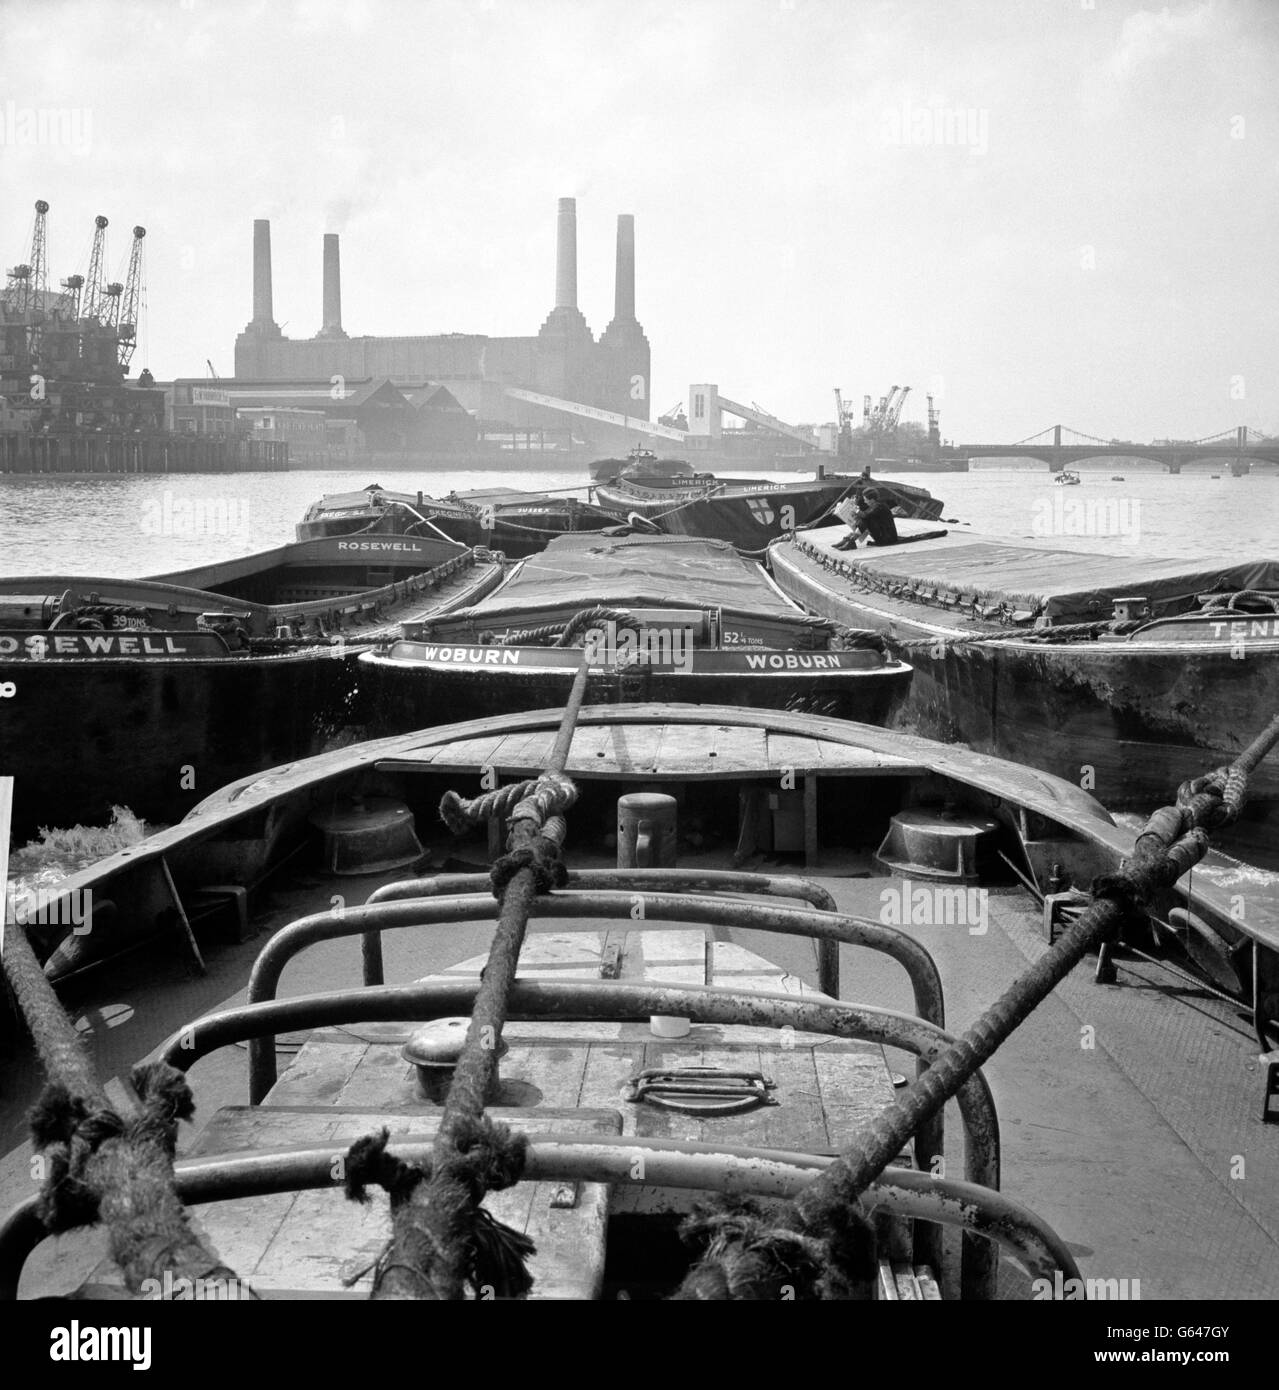 A view of cargo barges on the Thames, with Battersea Power Station in the background. Stock Photo